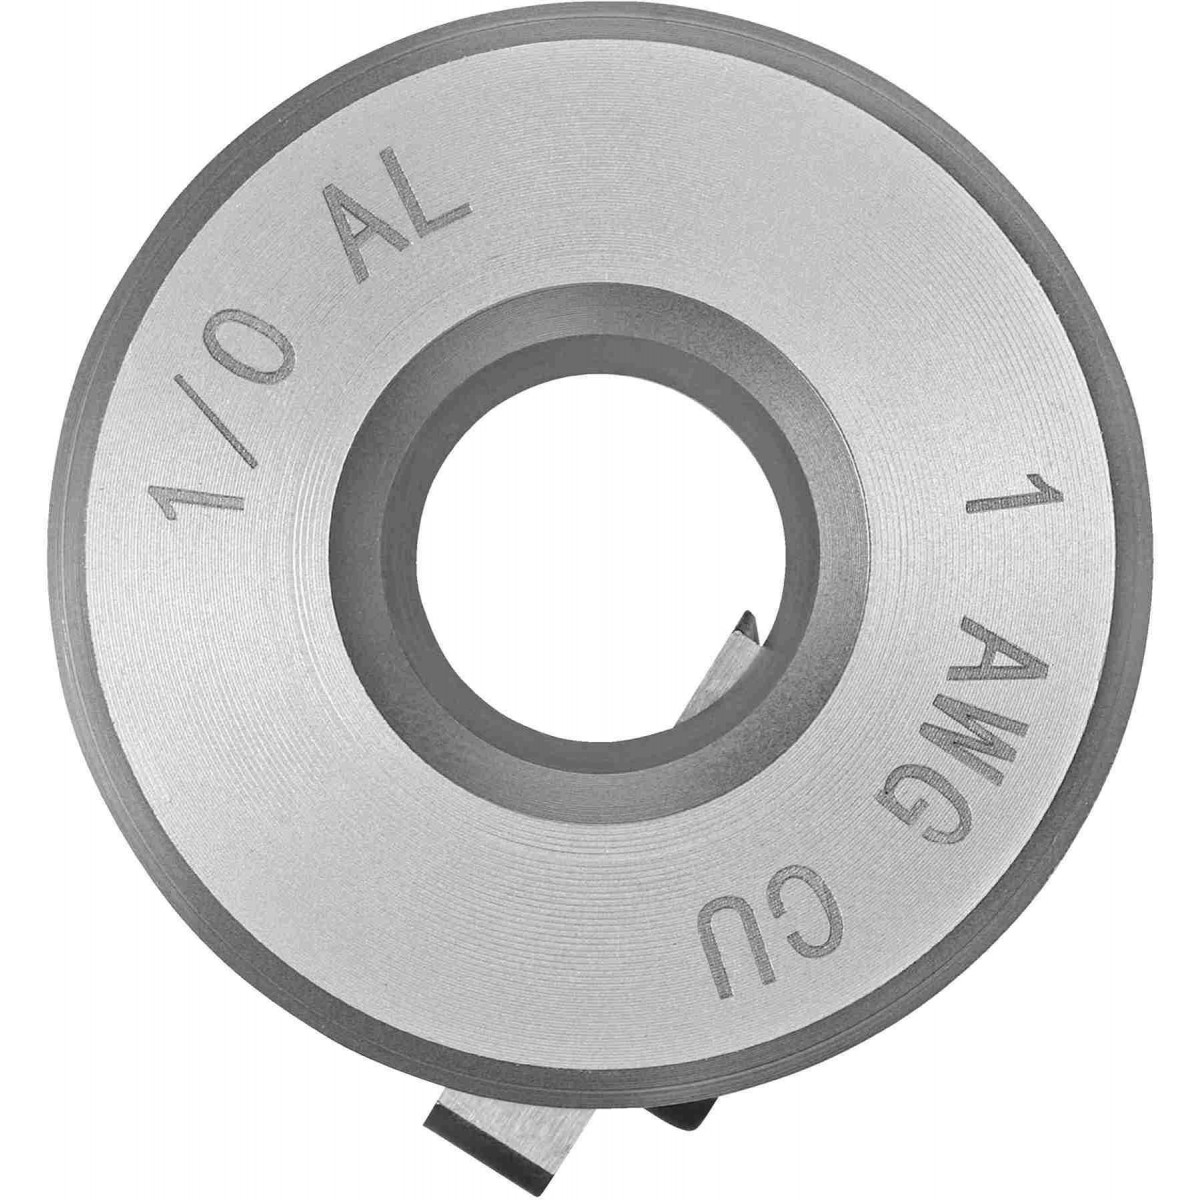 CABLE STRIPPER BUSHINGS